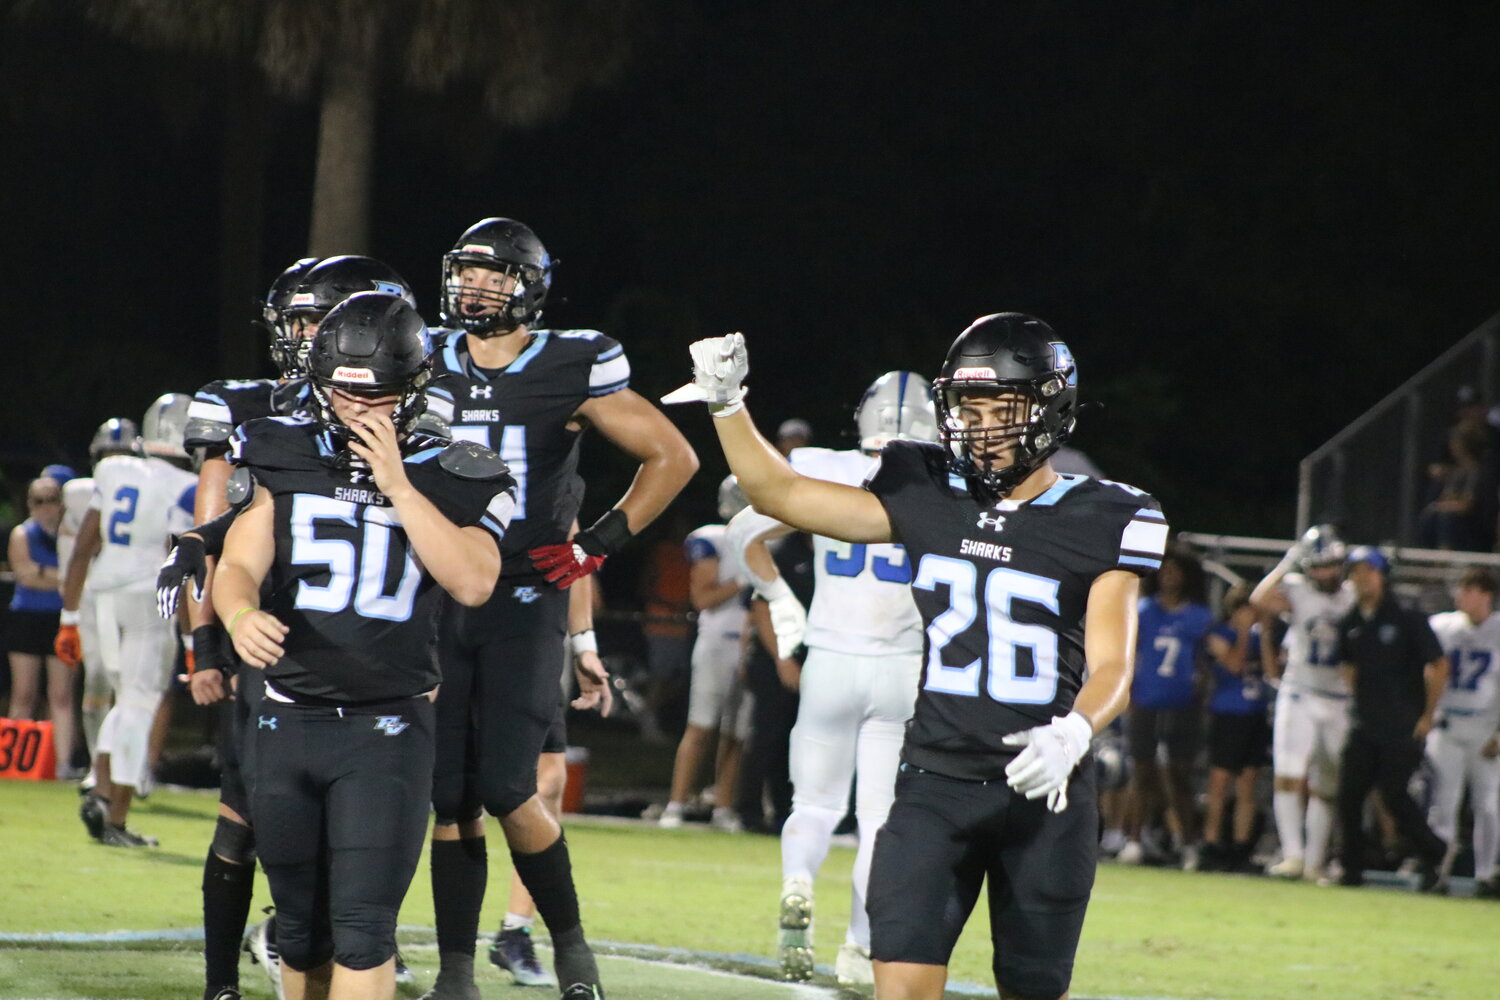 The Sharks’ defense looks to force a lot of fourth downs against Middleburg on Sept. 15.